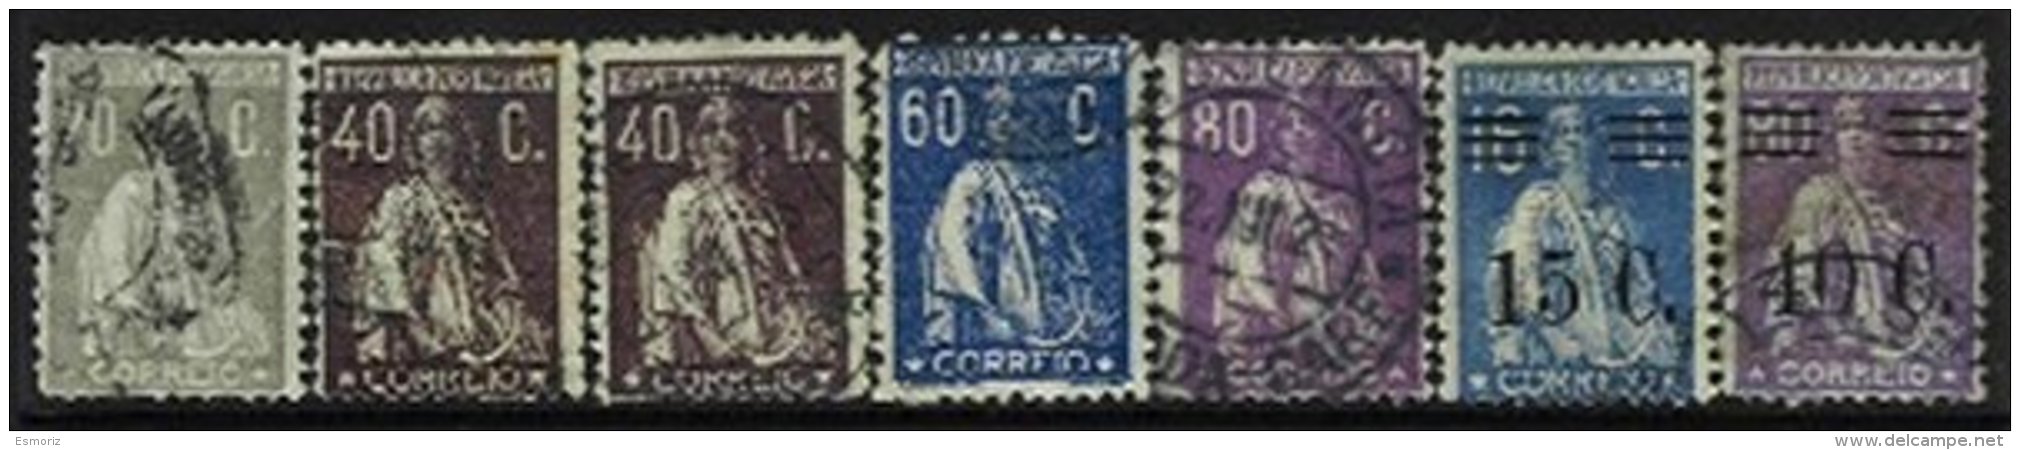 PORTUGAL, AF 240, 245, 283, 286, 459, 474: Yv 250, 280, 284, 288, 463, 478, Shifted Perfs, Used, F/VF - Unused Stamps